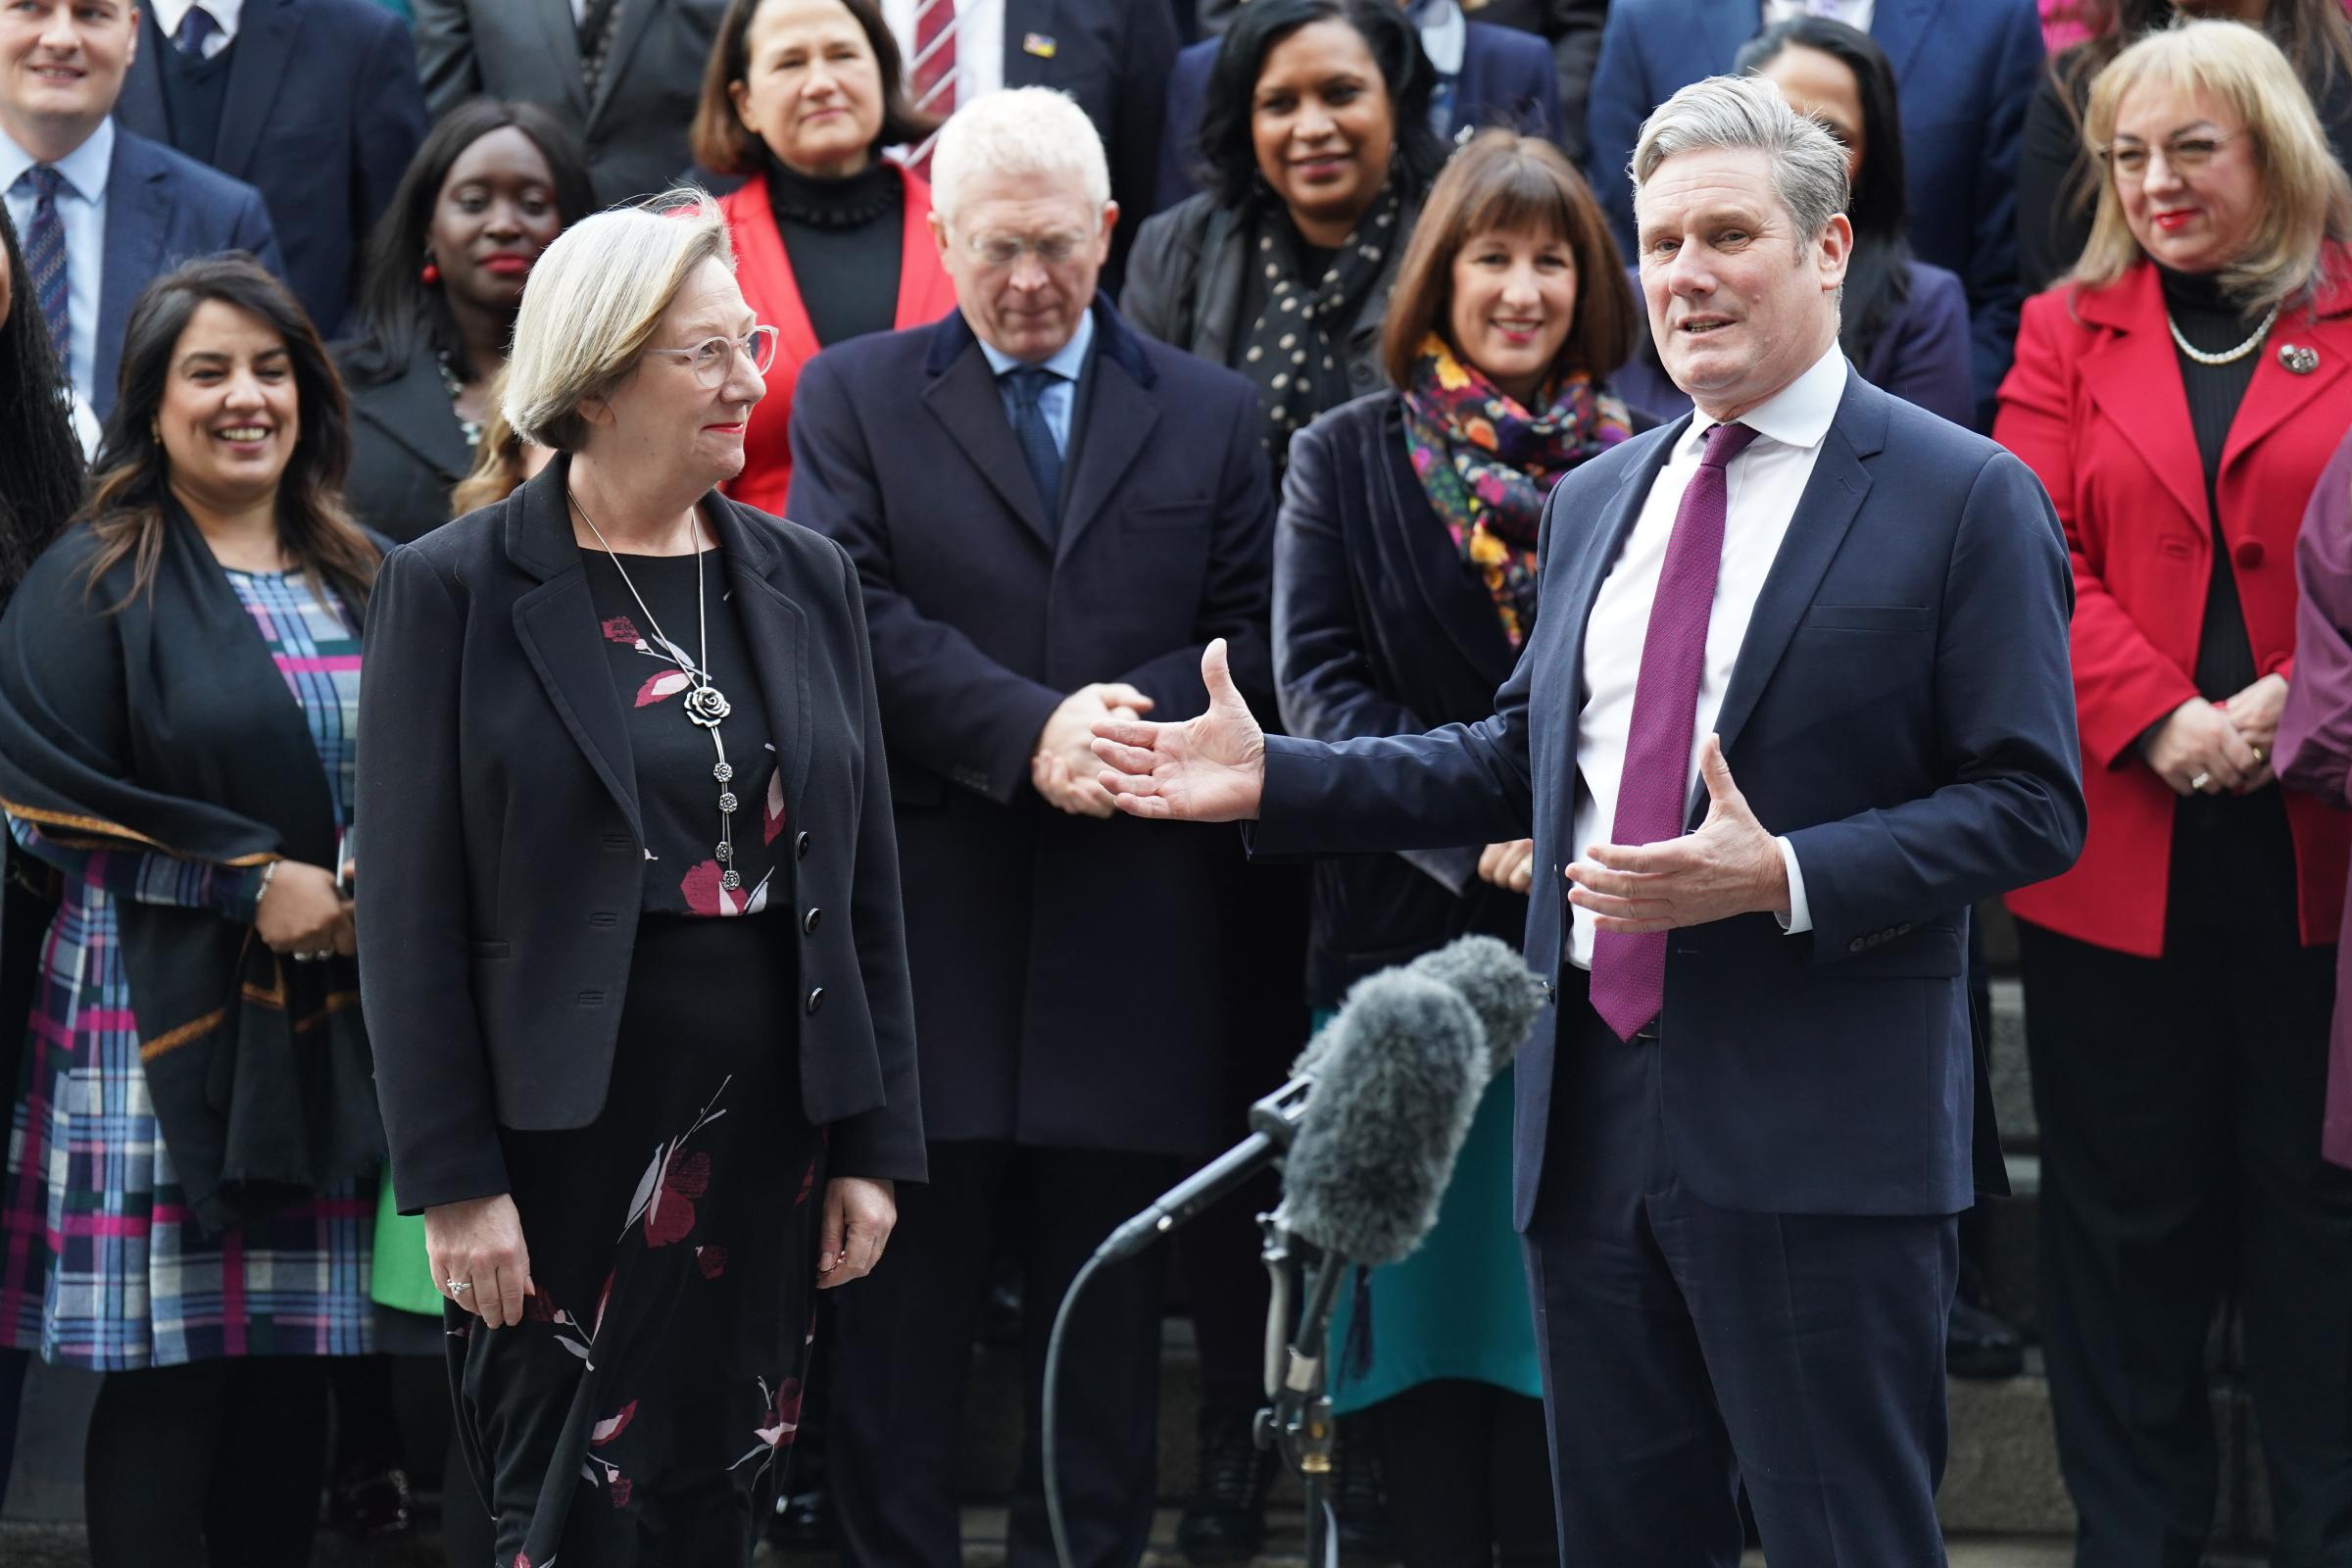 Sir Keir Starmer and members of the Parliamentary Labour Party welcome Samantha Dixon (left) to Parliament in London as the newly elected Labour MP for the City of Chester.